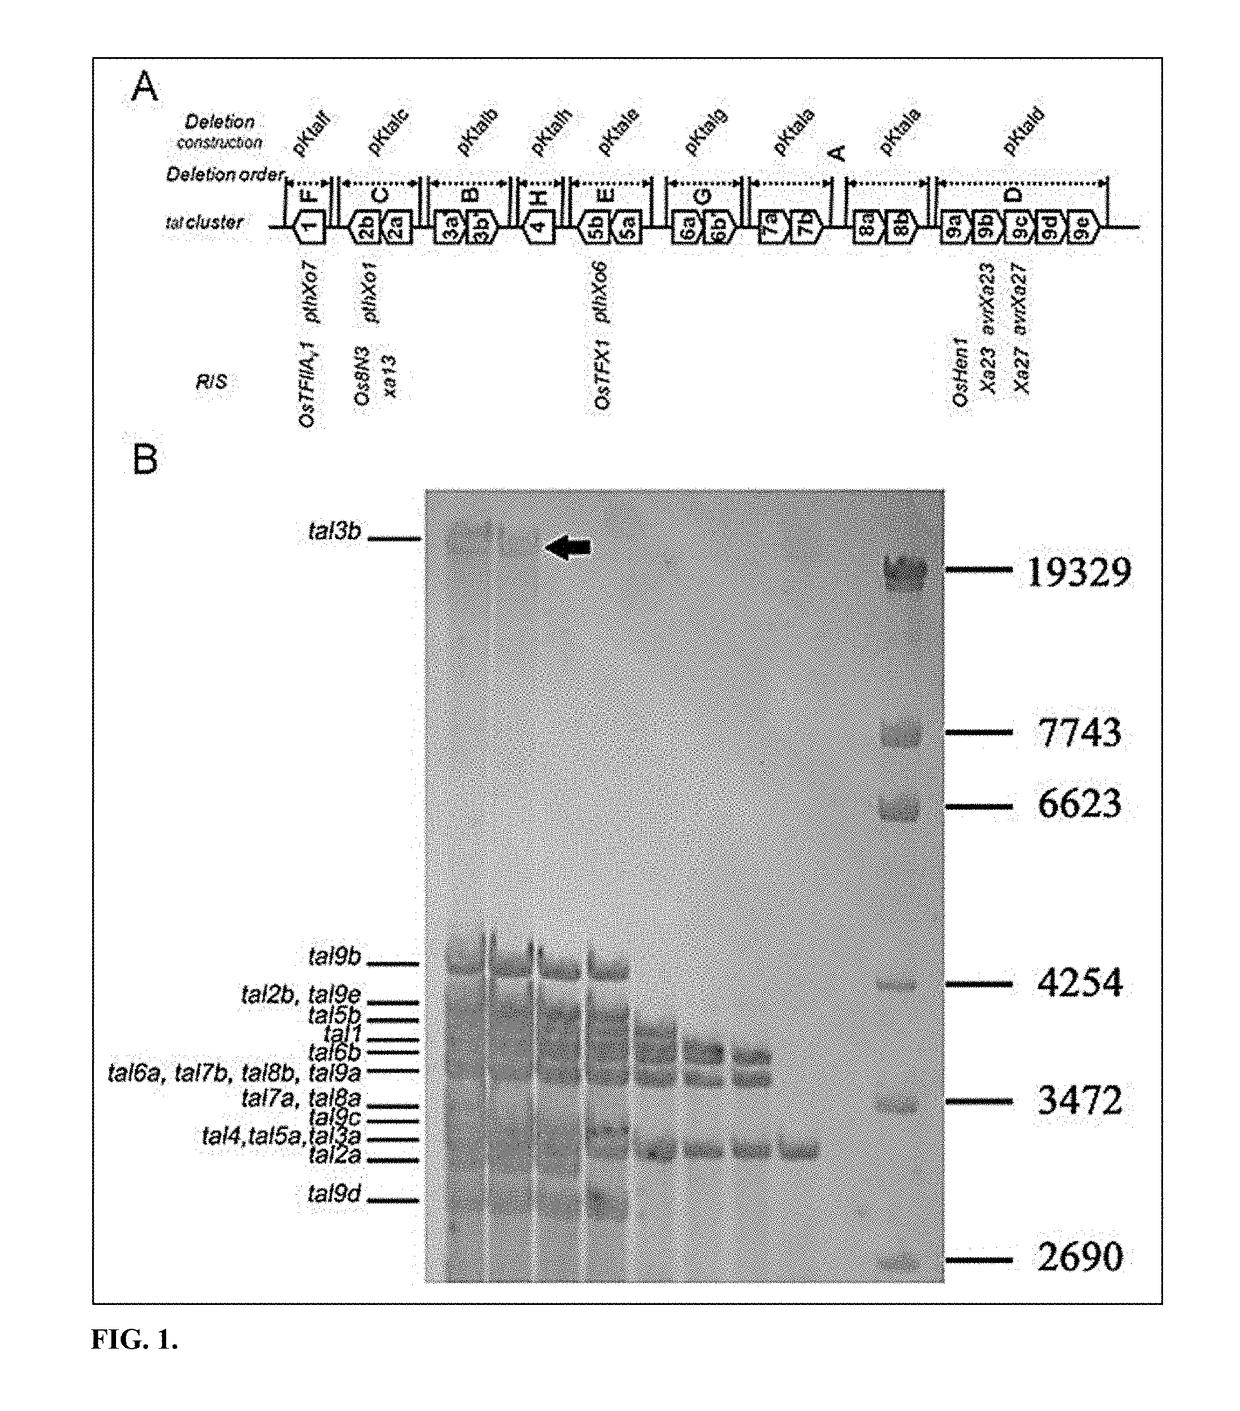 Xa1-mediated resistance to tale-containing bacteria